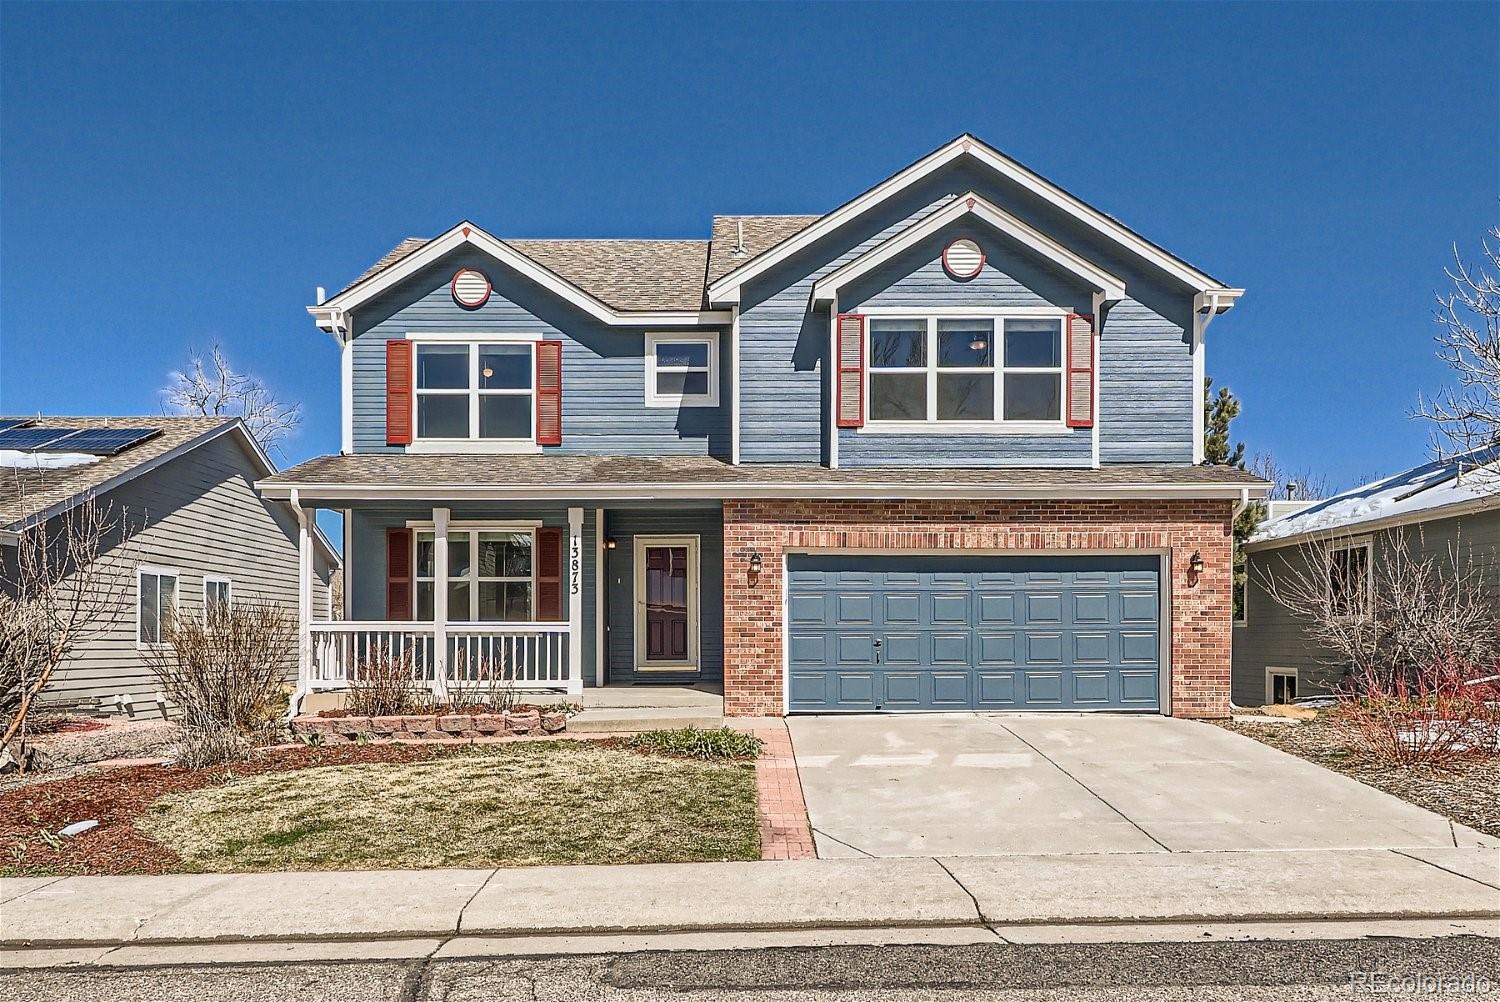 13873 W 64th Place, arvada MLS: 5907664 Beds: 3 Baths: 4 Price: $705,000